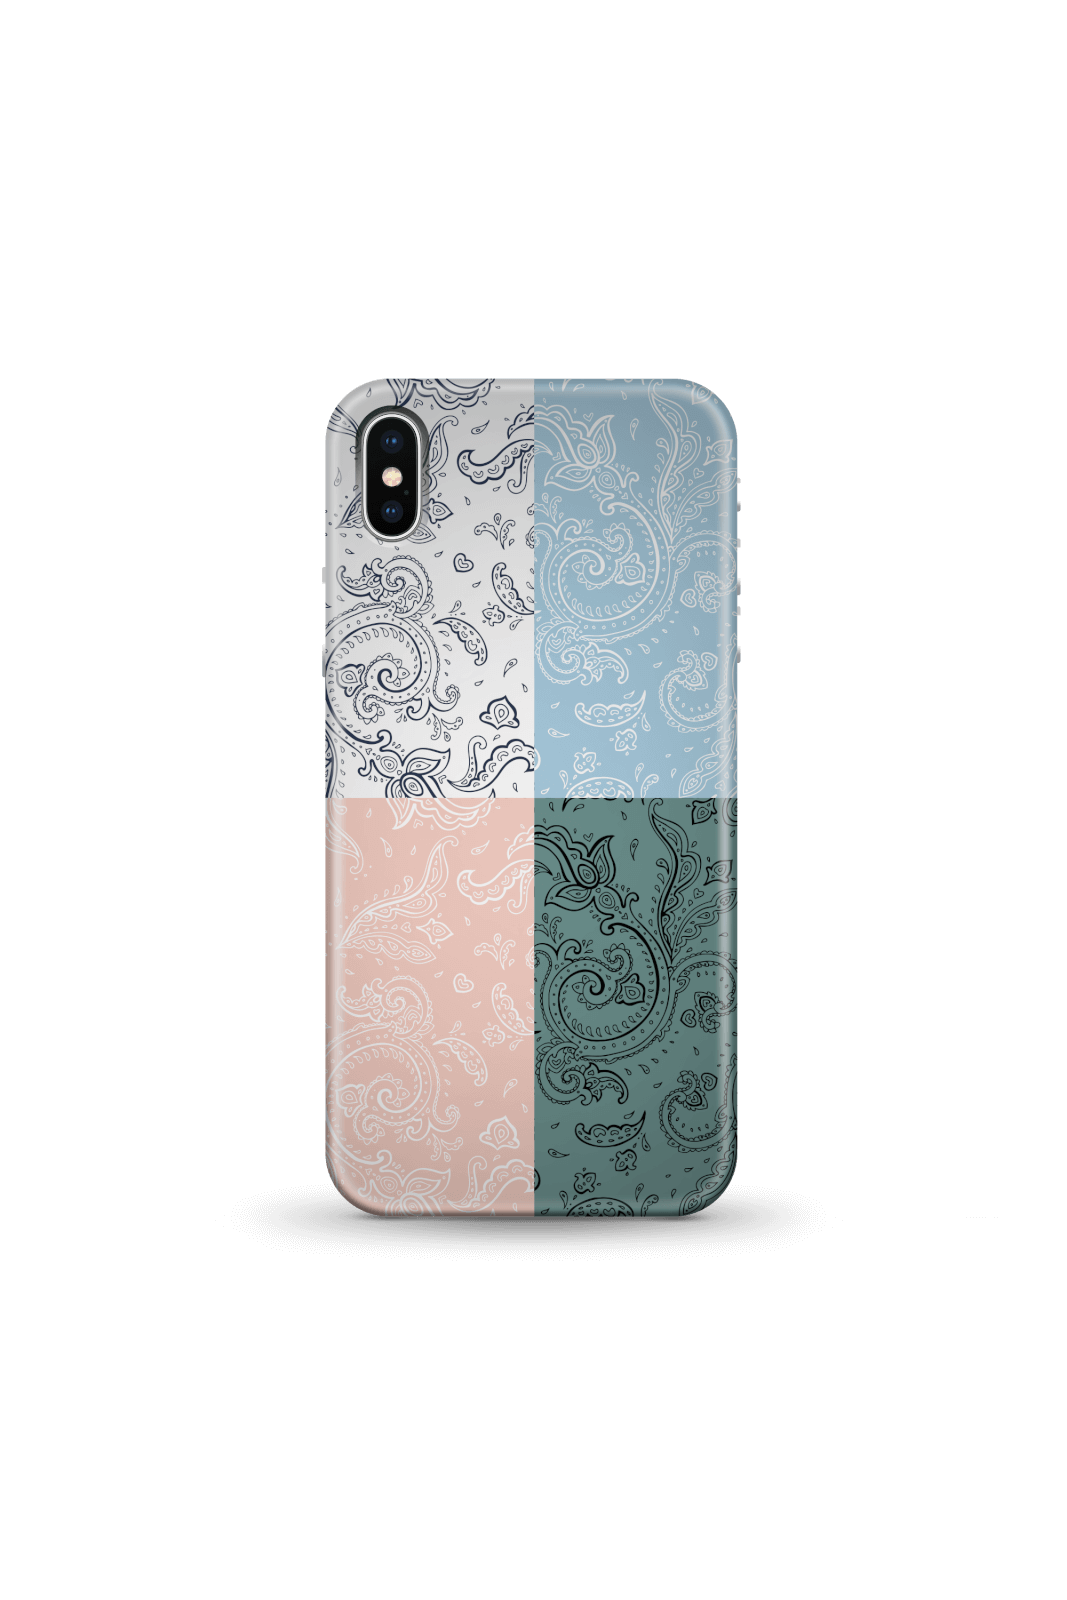 Patchwork Paisley Phone Case for iPhone and Android - iPhone 5/5s - Snap Case - Matte